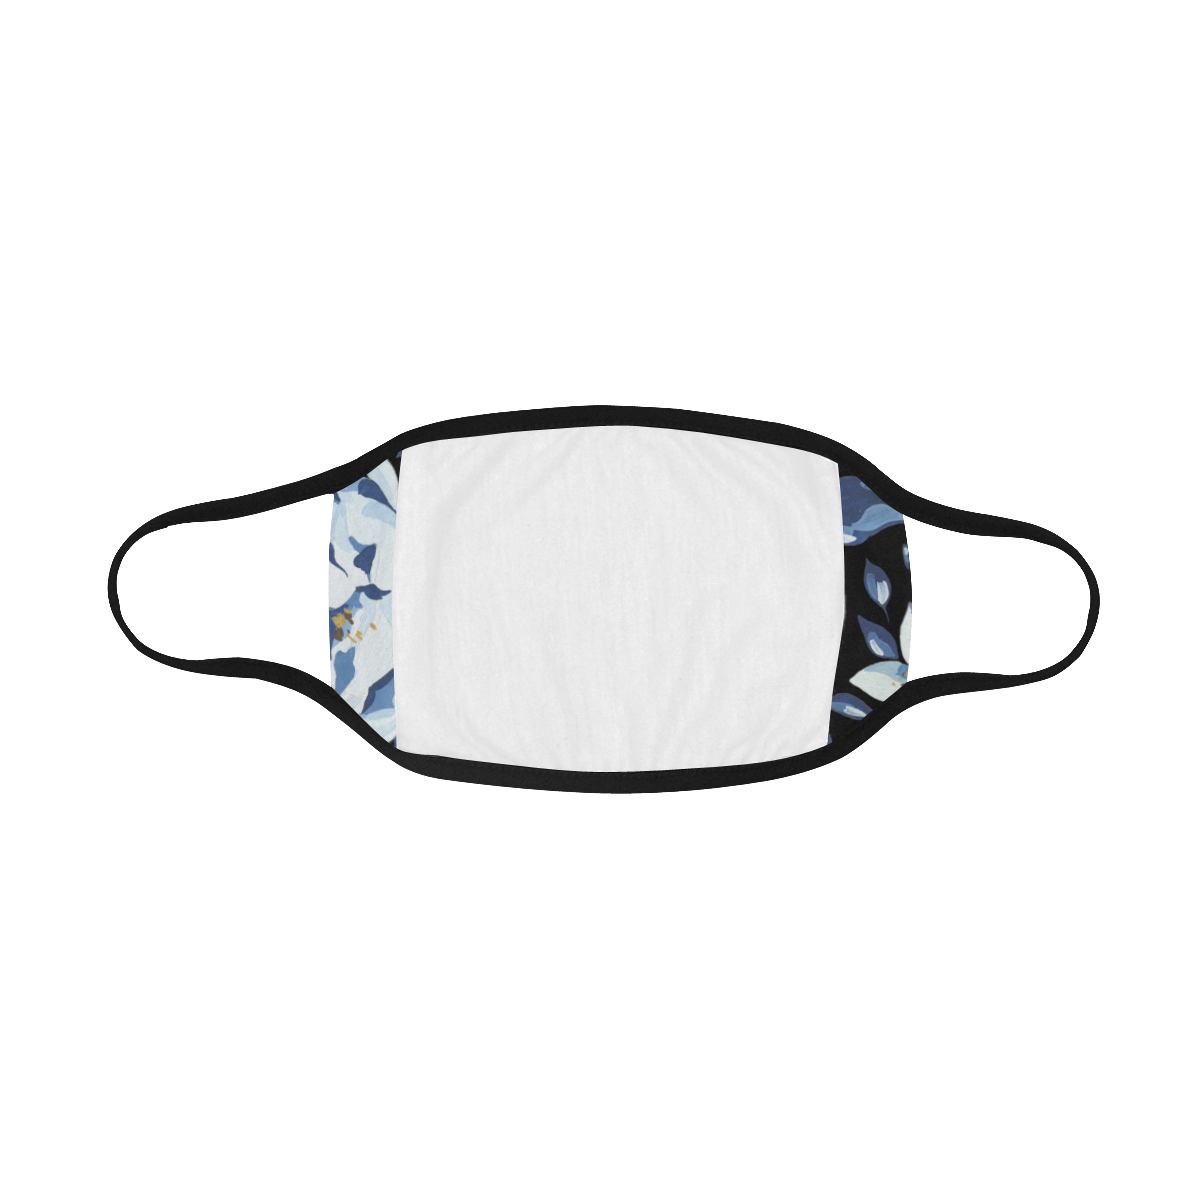 Blue Floral Mouth Mask Mouth Mask